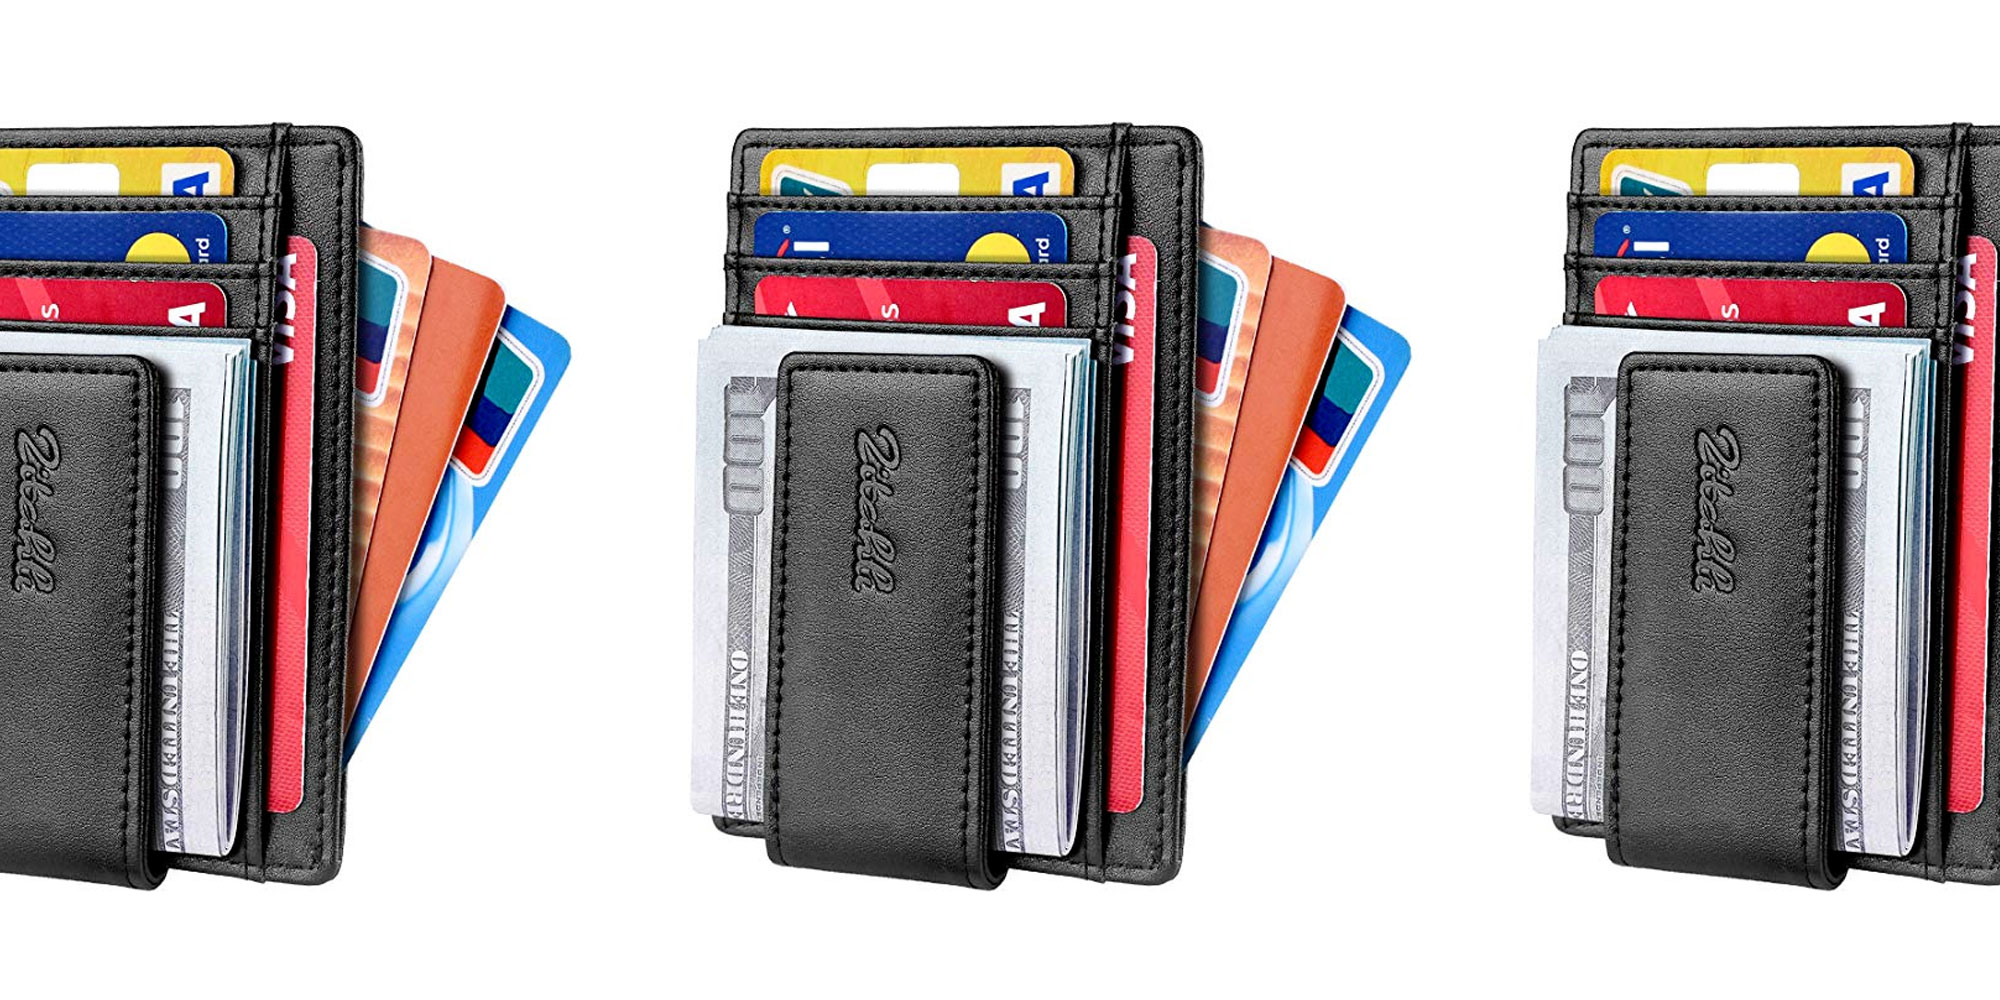 Slim down your daily carry w/ this minimal bifold front pocket wallet for under $9.50 Prime ...